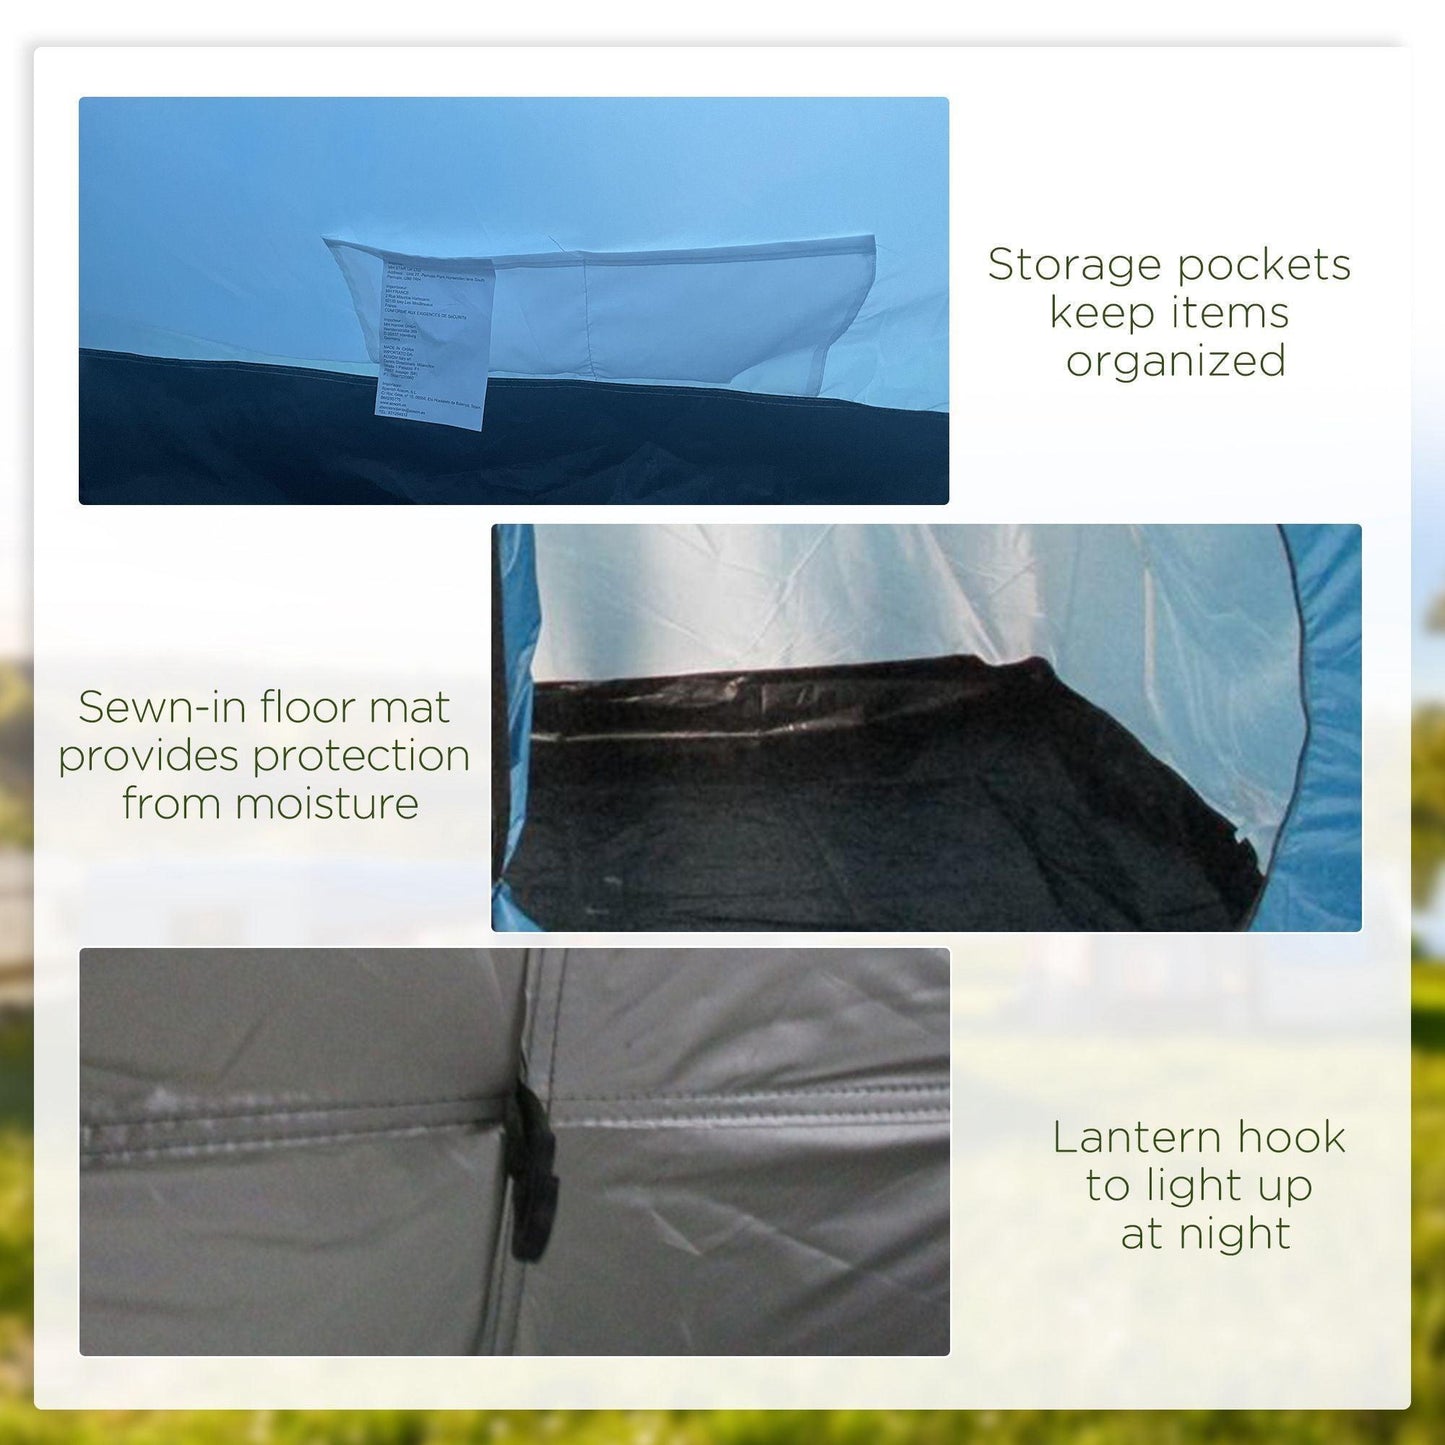 Outsunny 5-6 Man Tunnel Tent: Spacious and Secure - ALL4U RETAILER LTD